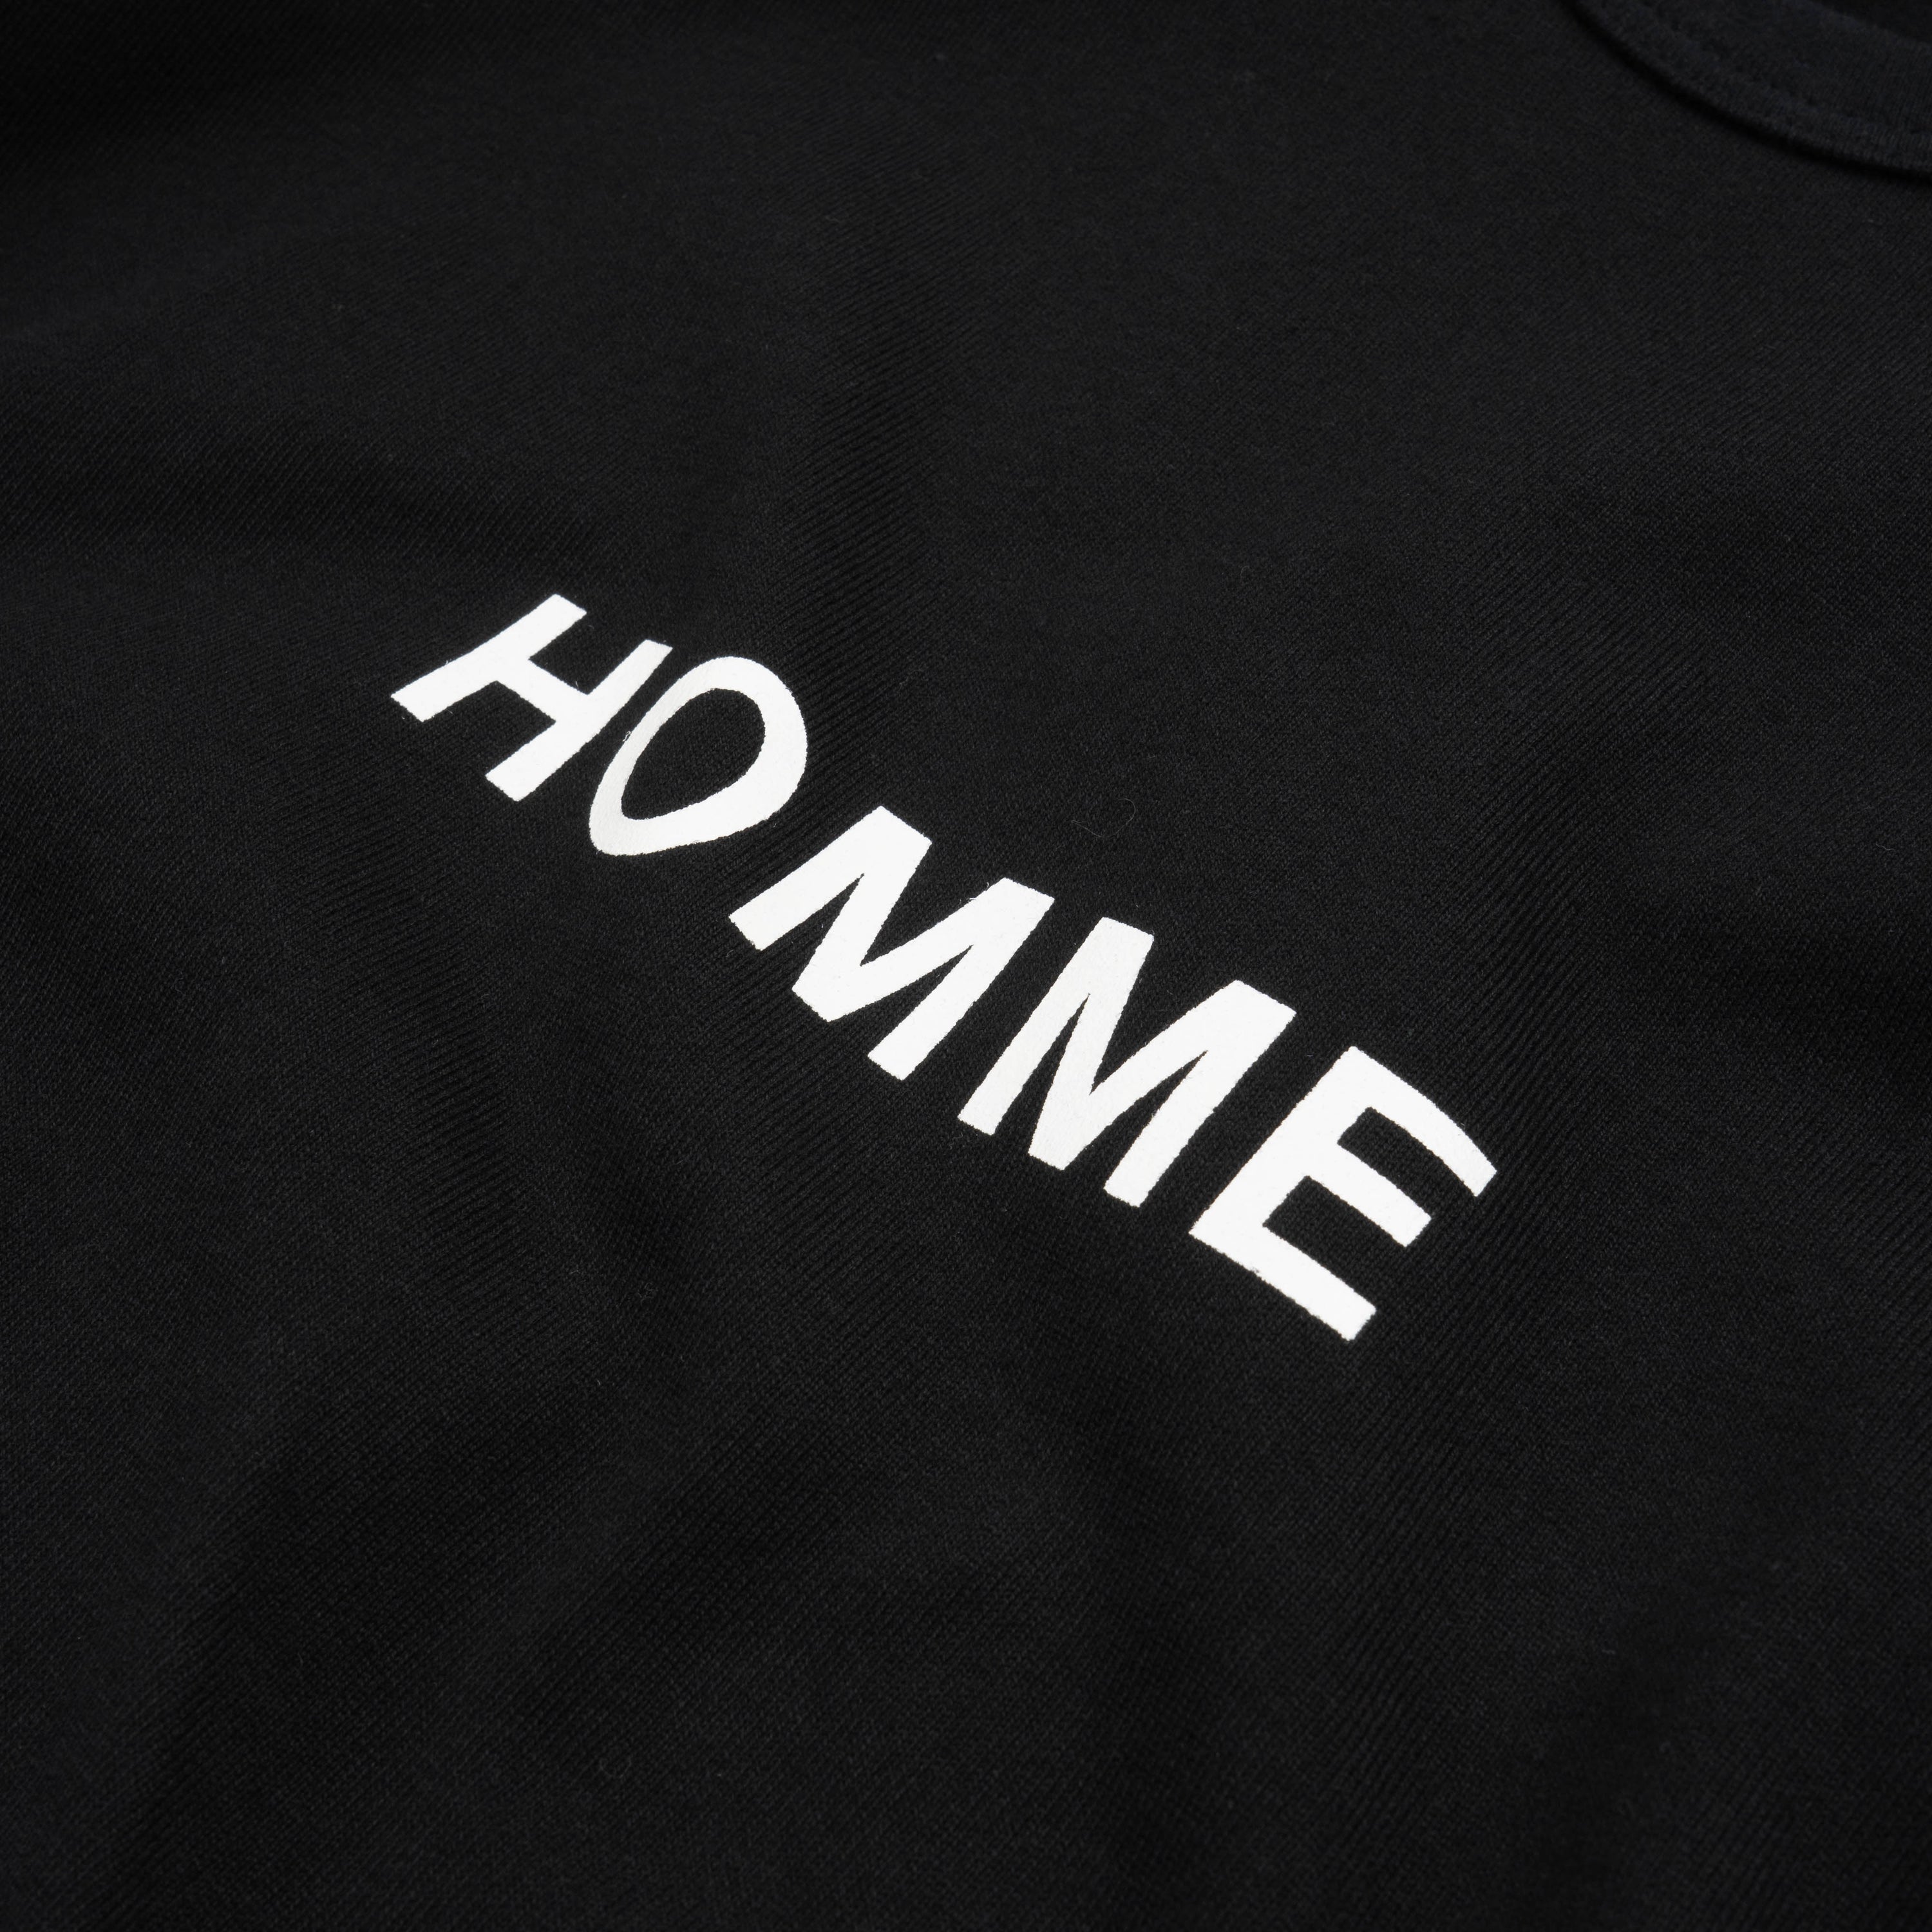 HOMME script logo printed at chest